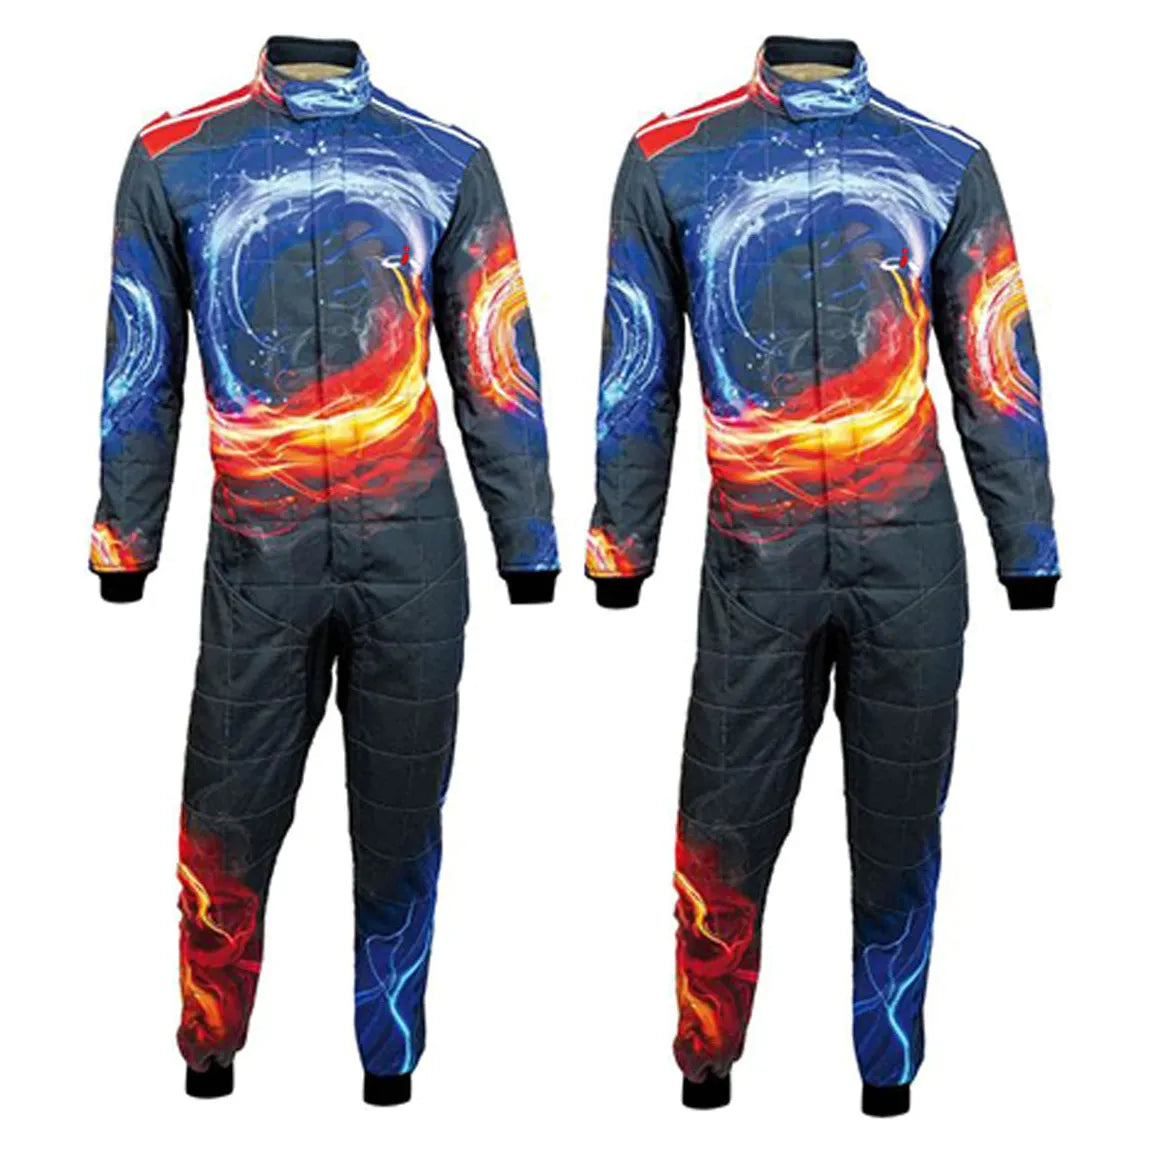 Go kart racing Sublimation Protective clothing Racing gear Suit N-074